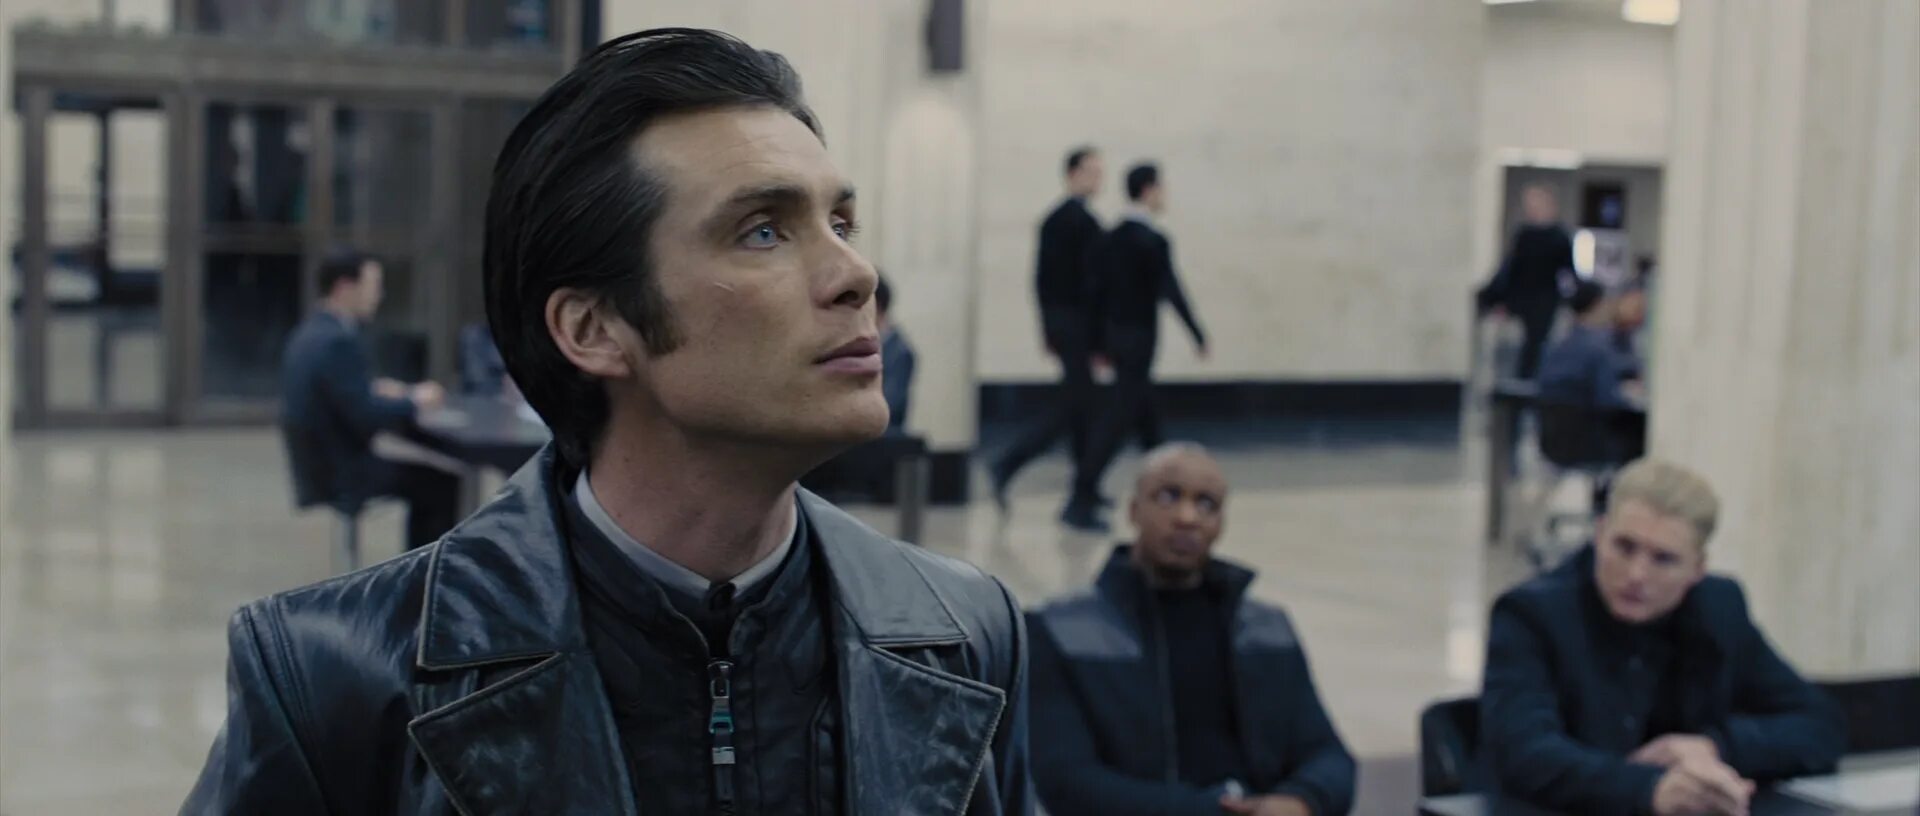 Фильм in time 2011. Cillian Murphy in time. Время фильм 2011. Время фильм 2011 актёры.